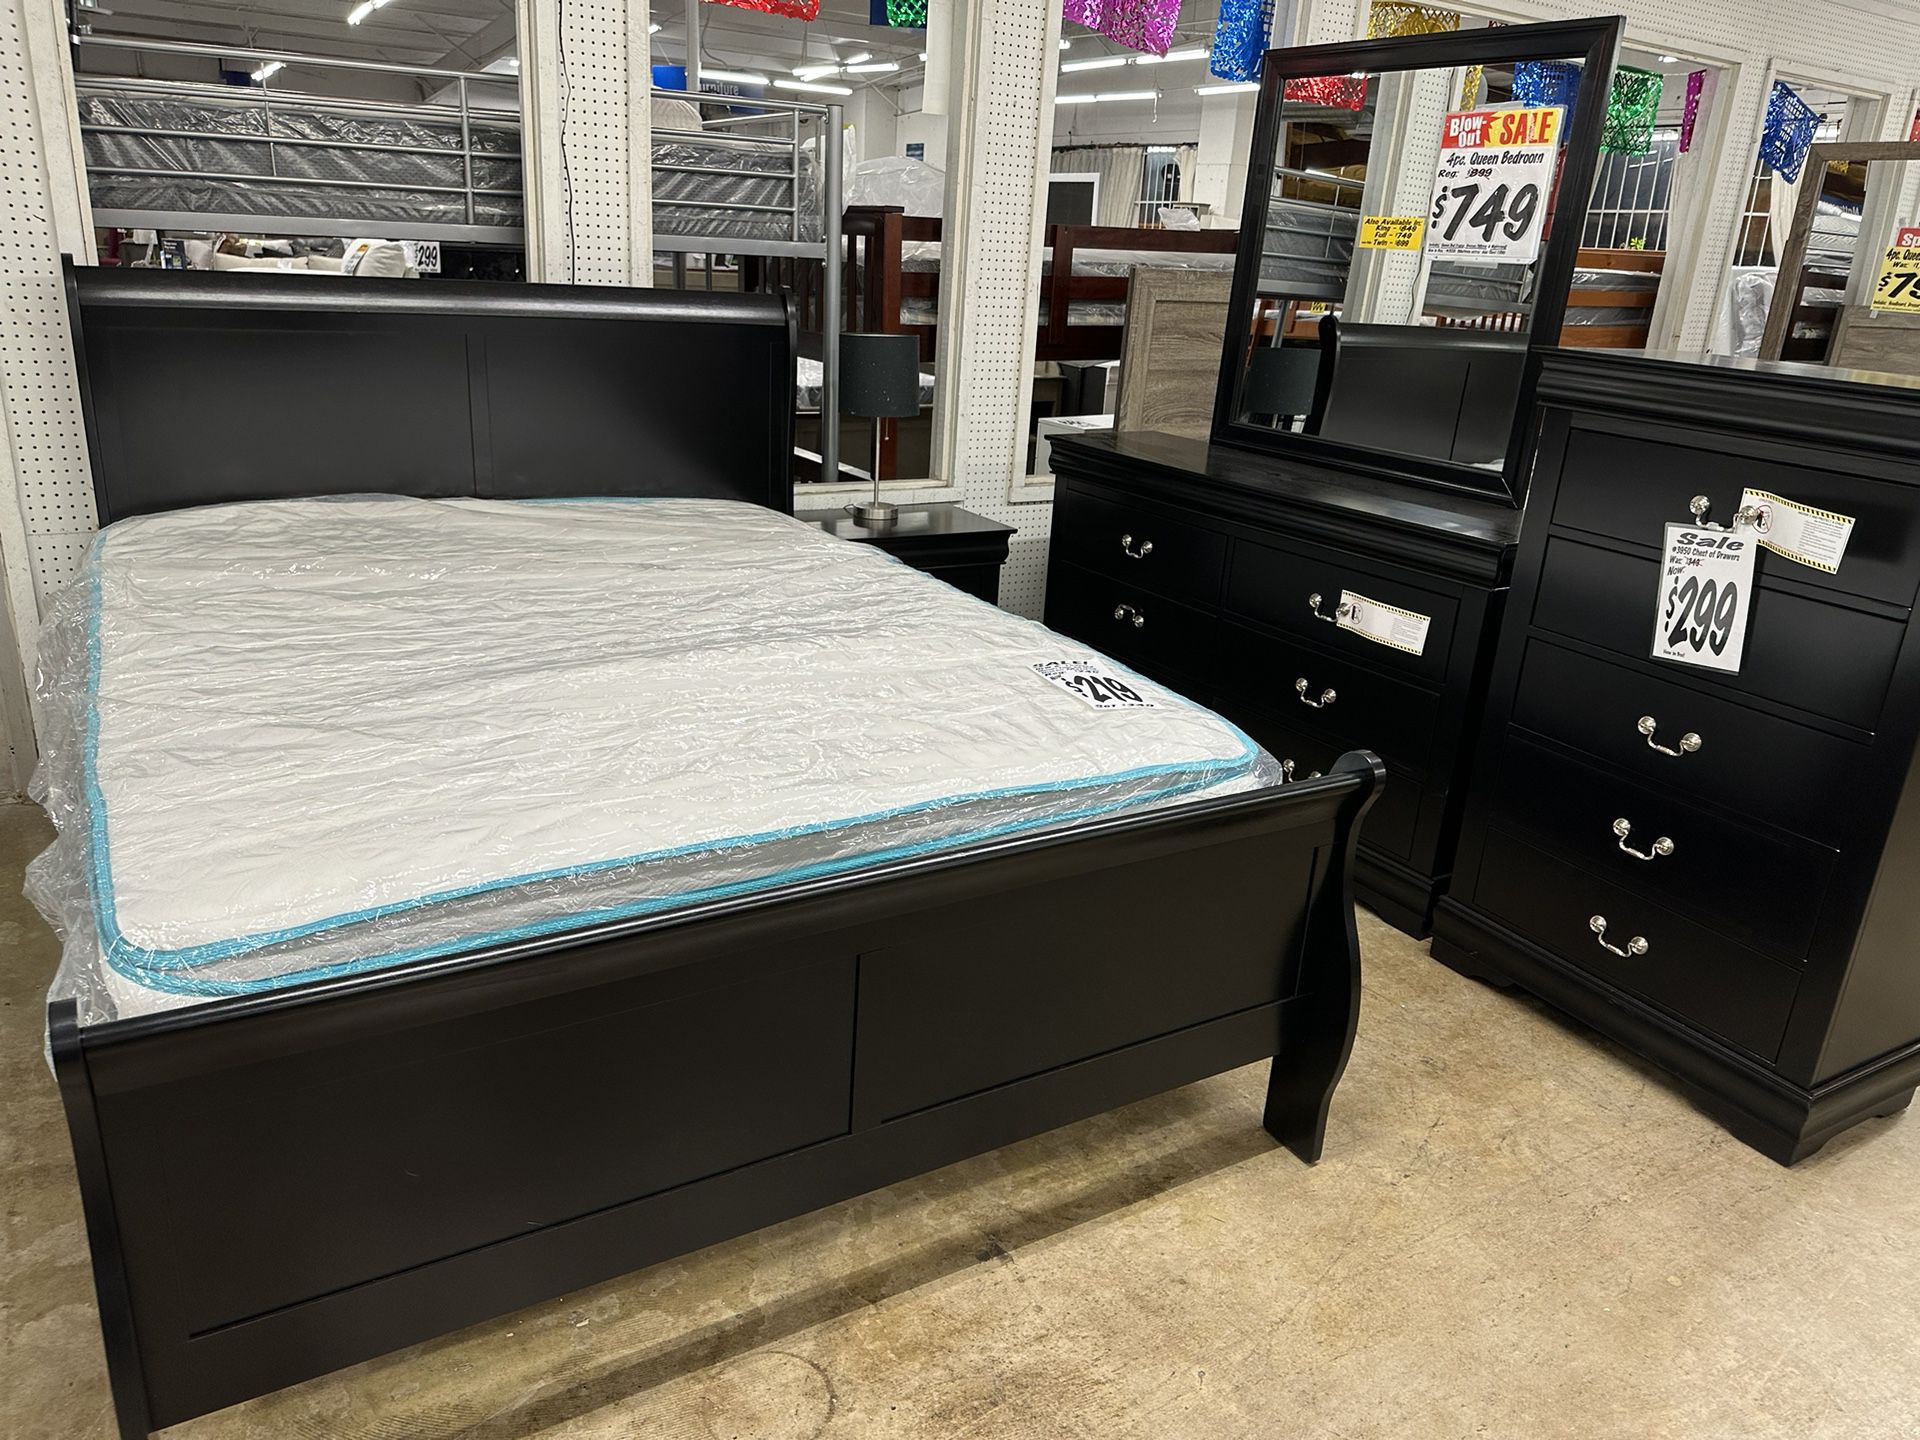 BRAND NEW 4pc. Bedroom Set - Black, Cherry, White Or Gray!  Bed, Dresser, Mirror & Nightstand- NEW IN BOXES!